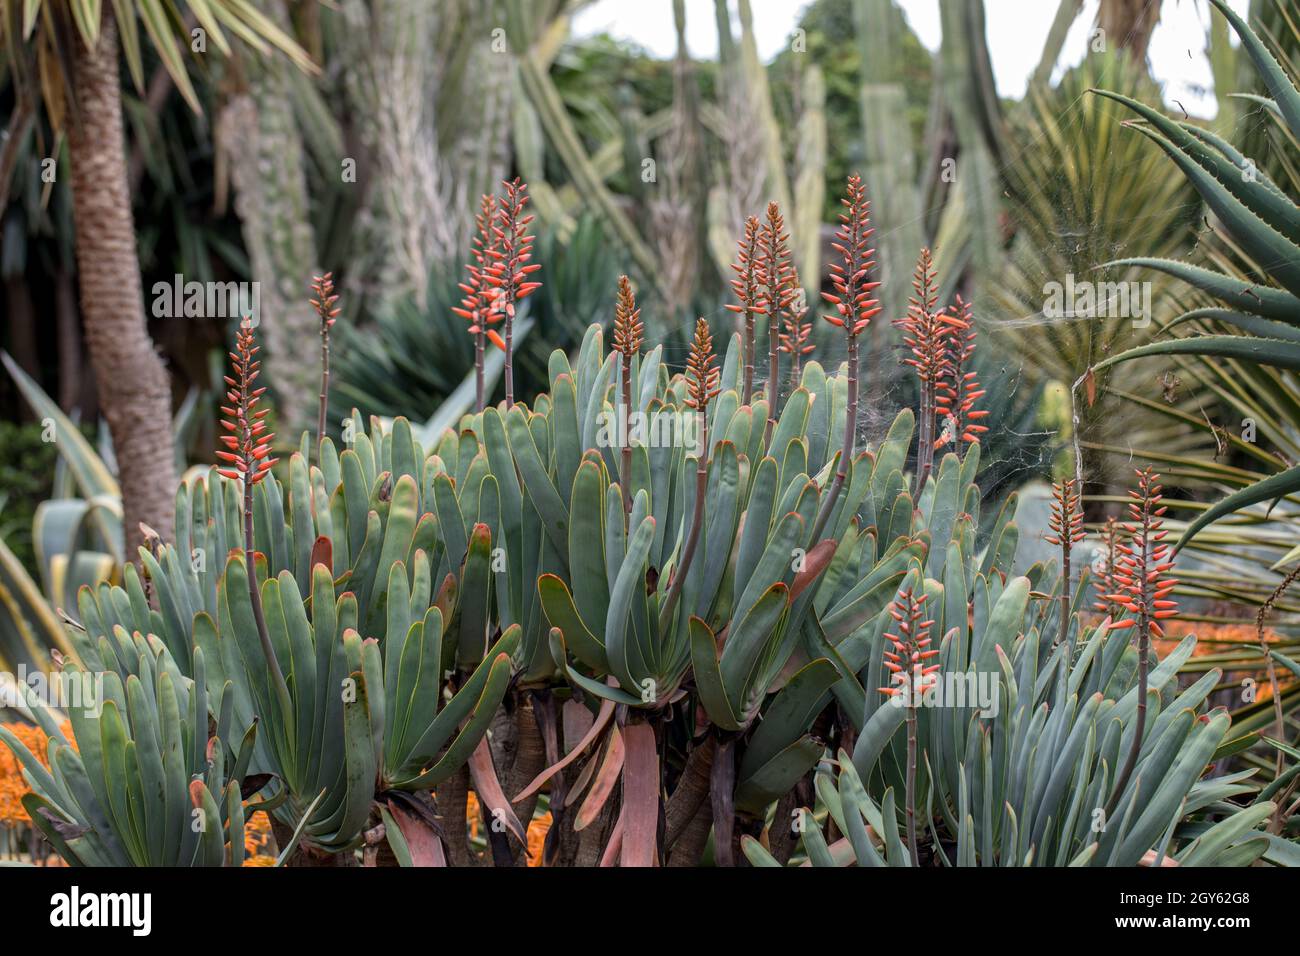 Aloe plant in bloom. Spectacular tall bright orange tubular flower spikes of an Aloe succulent species in  bloom are decorative and long lasting Stock Photo